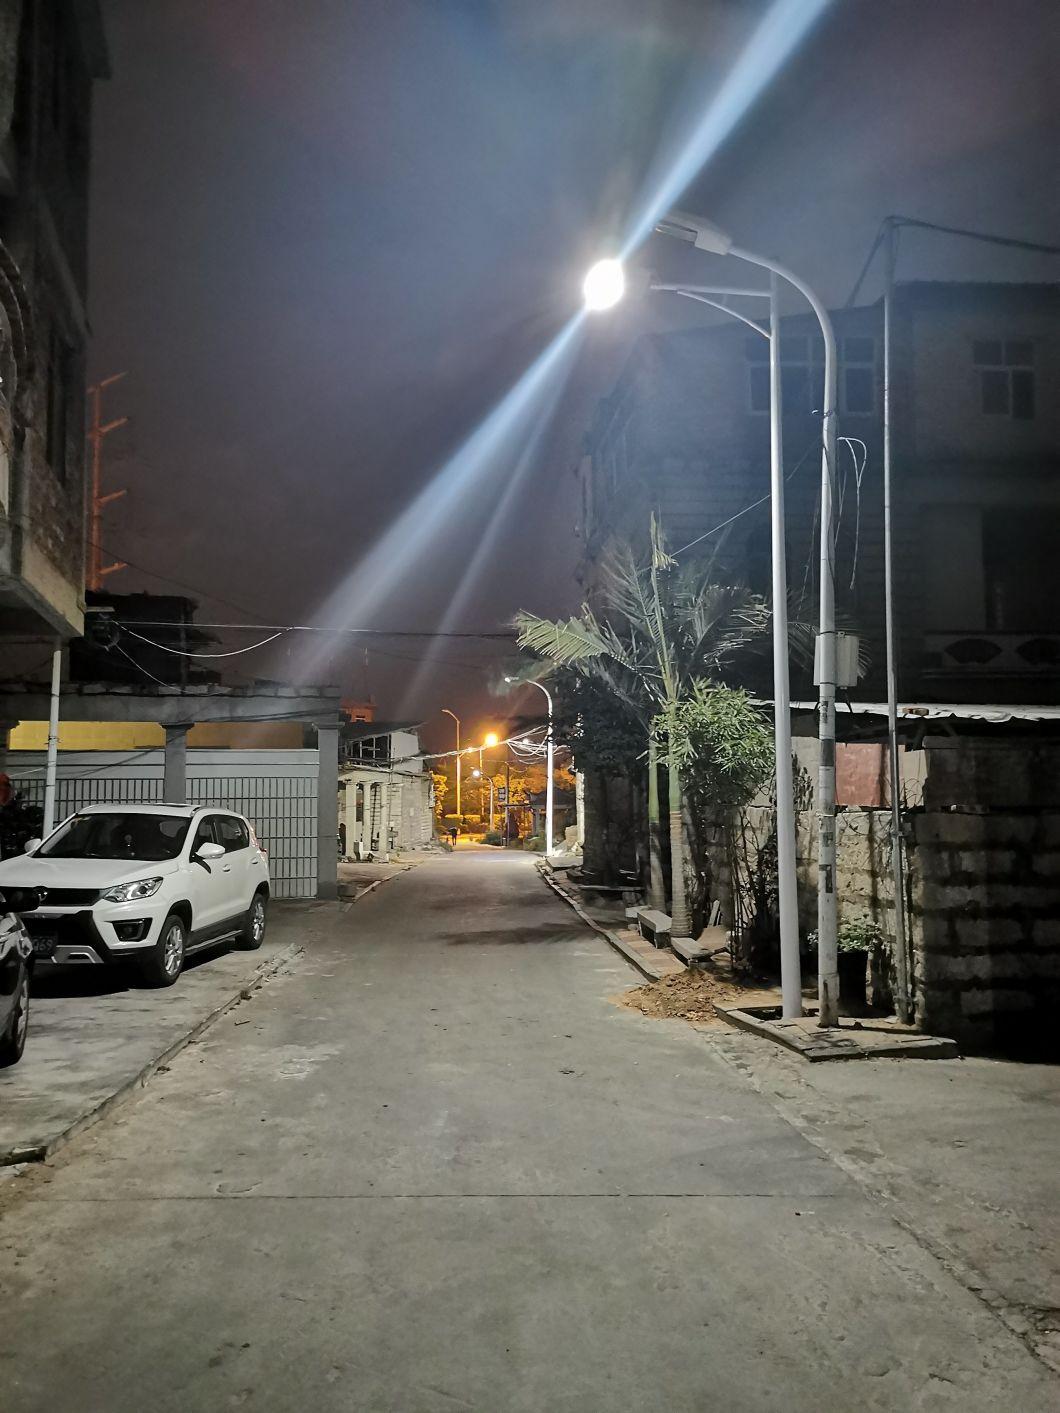 240W IP66 Waterproof LED Aluminum Hight Quality Street Energy Saving Power System Home Portable Lights, Integrated All in One Solar Street Lighting.